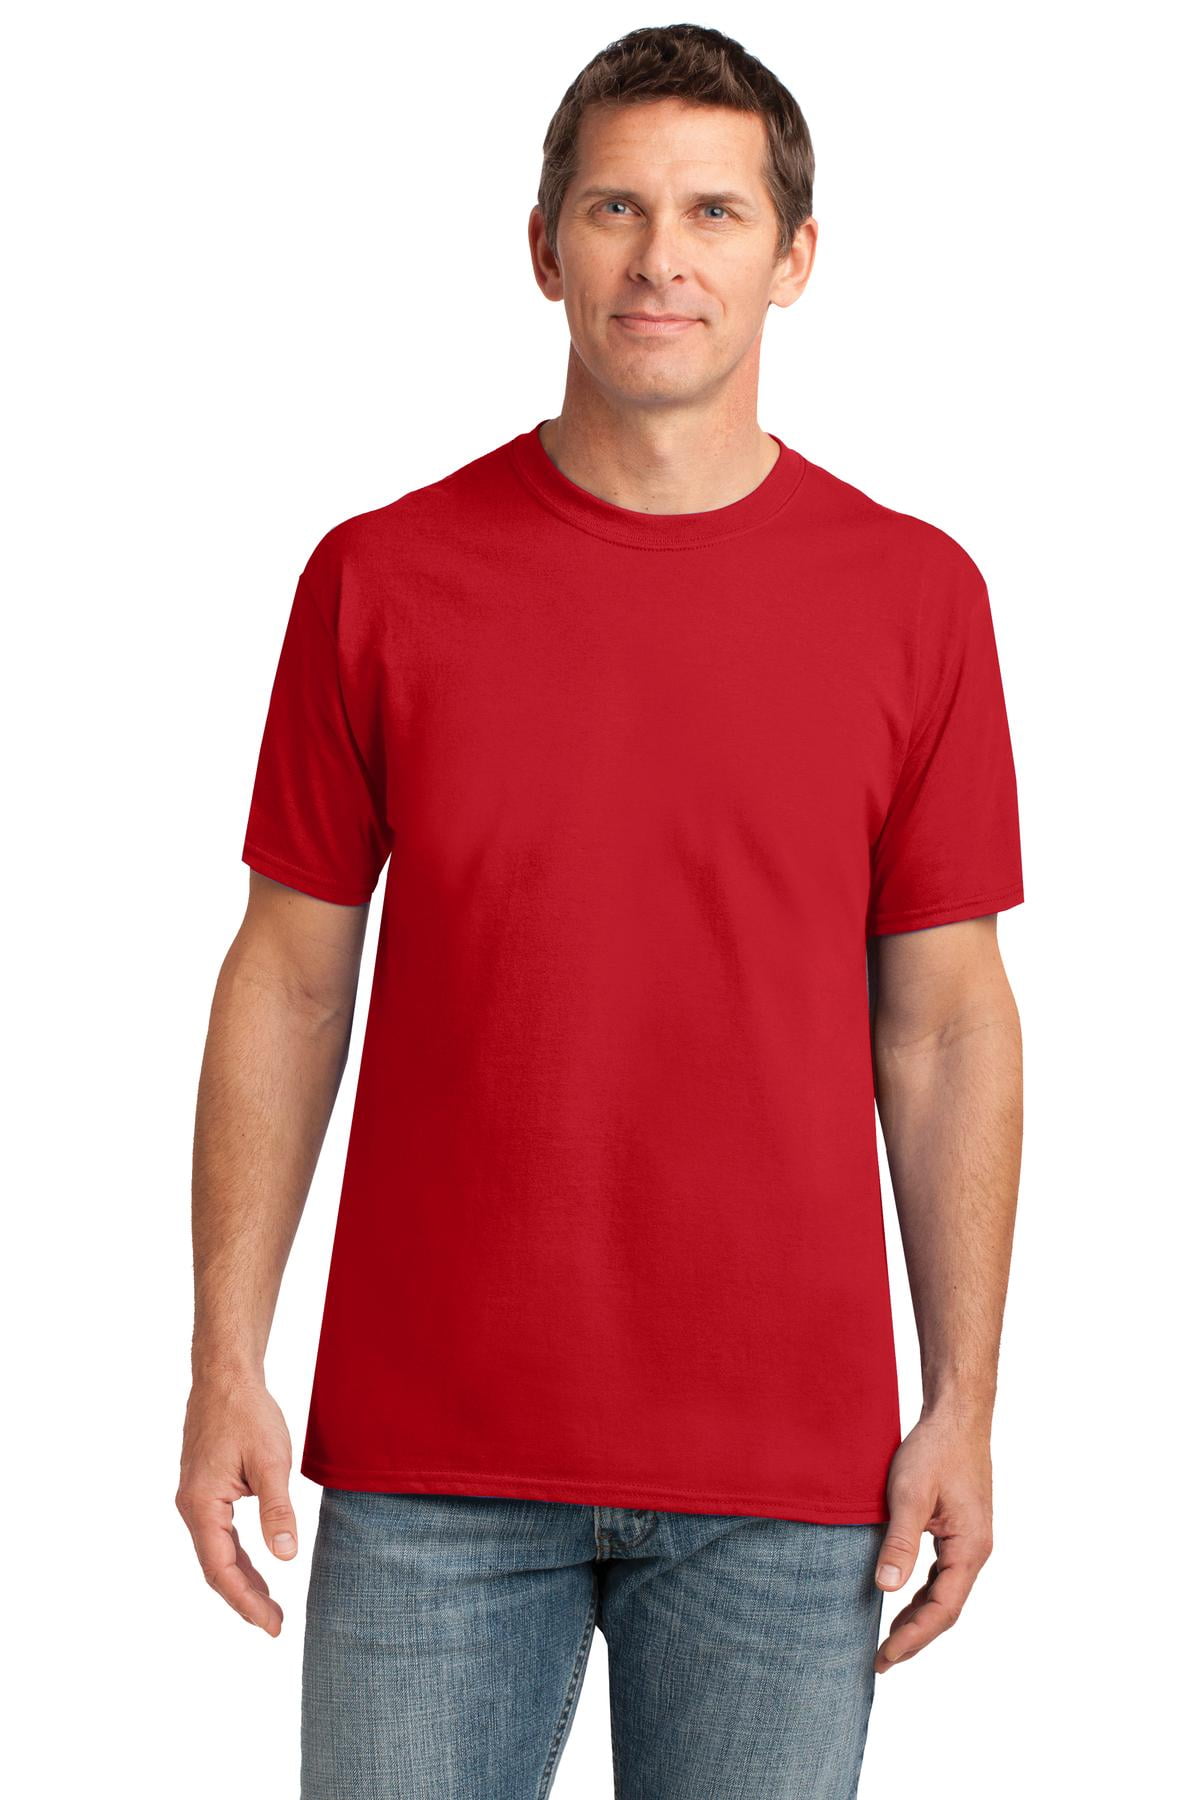 red polyester shirt